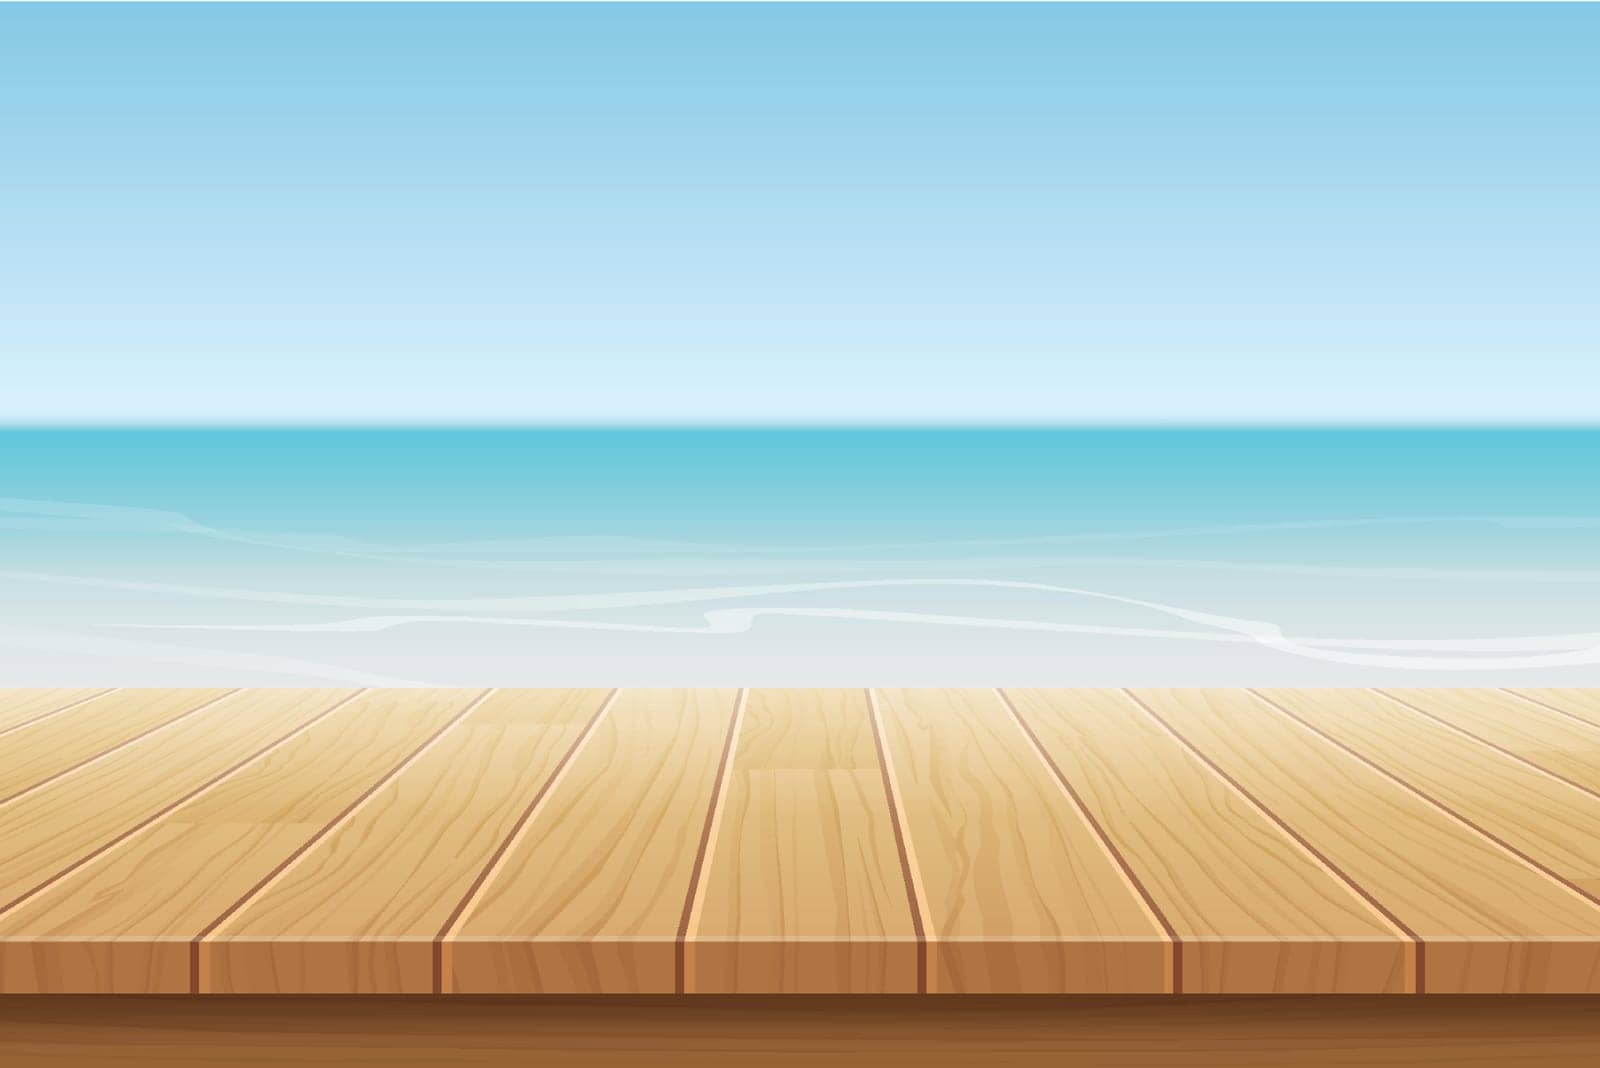 summer background blue sky with sea and wooden for product display montages.